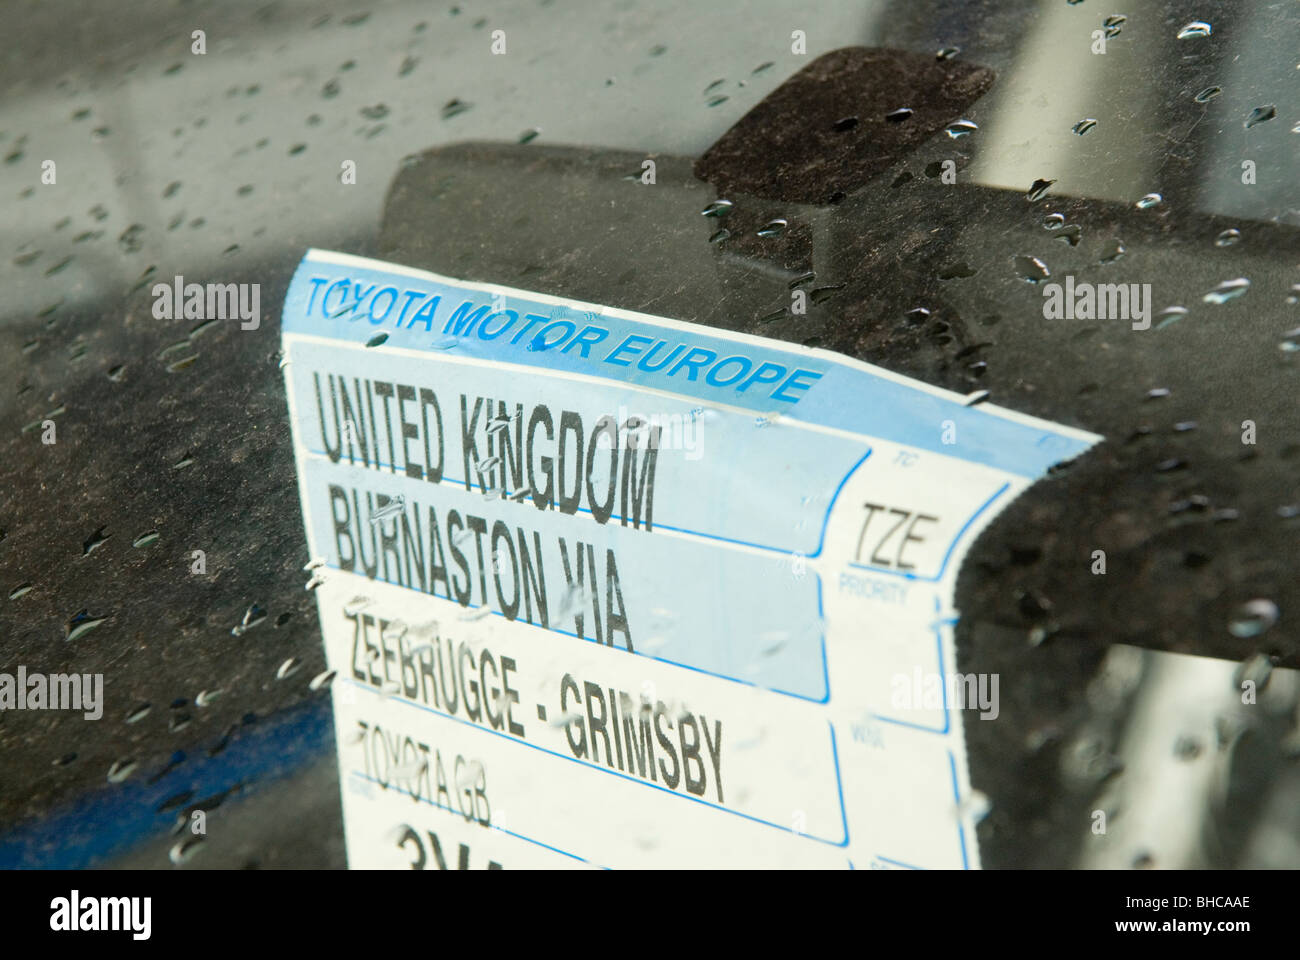 Toyota cars unsold. Import from Europe sticker in window. London UK 2010.  HOMER SYKES Stock Photo